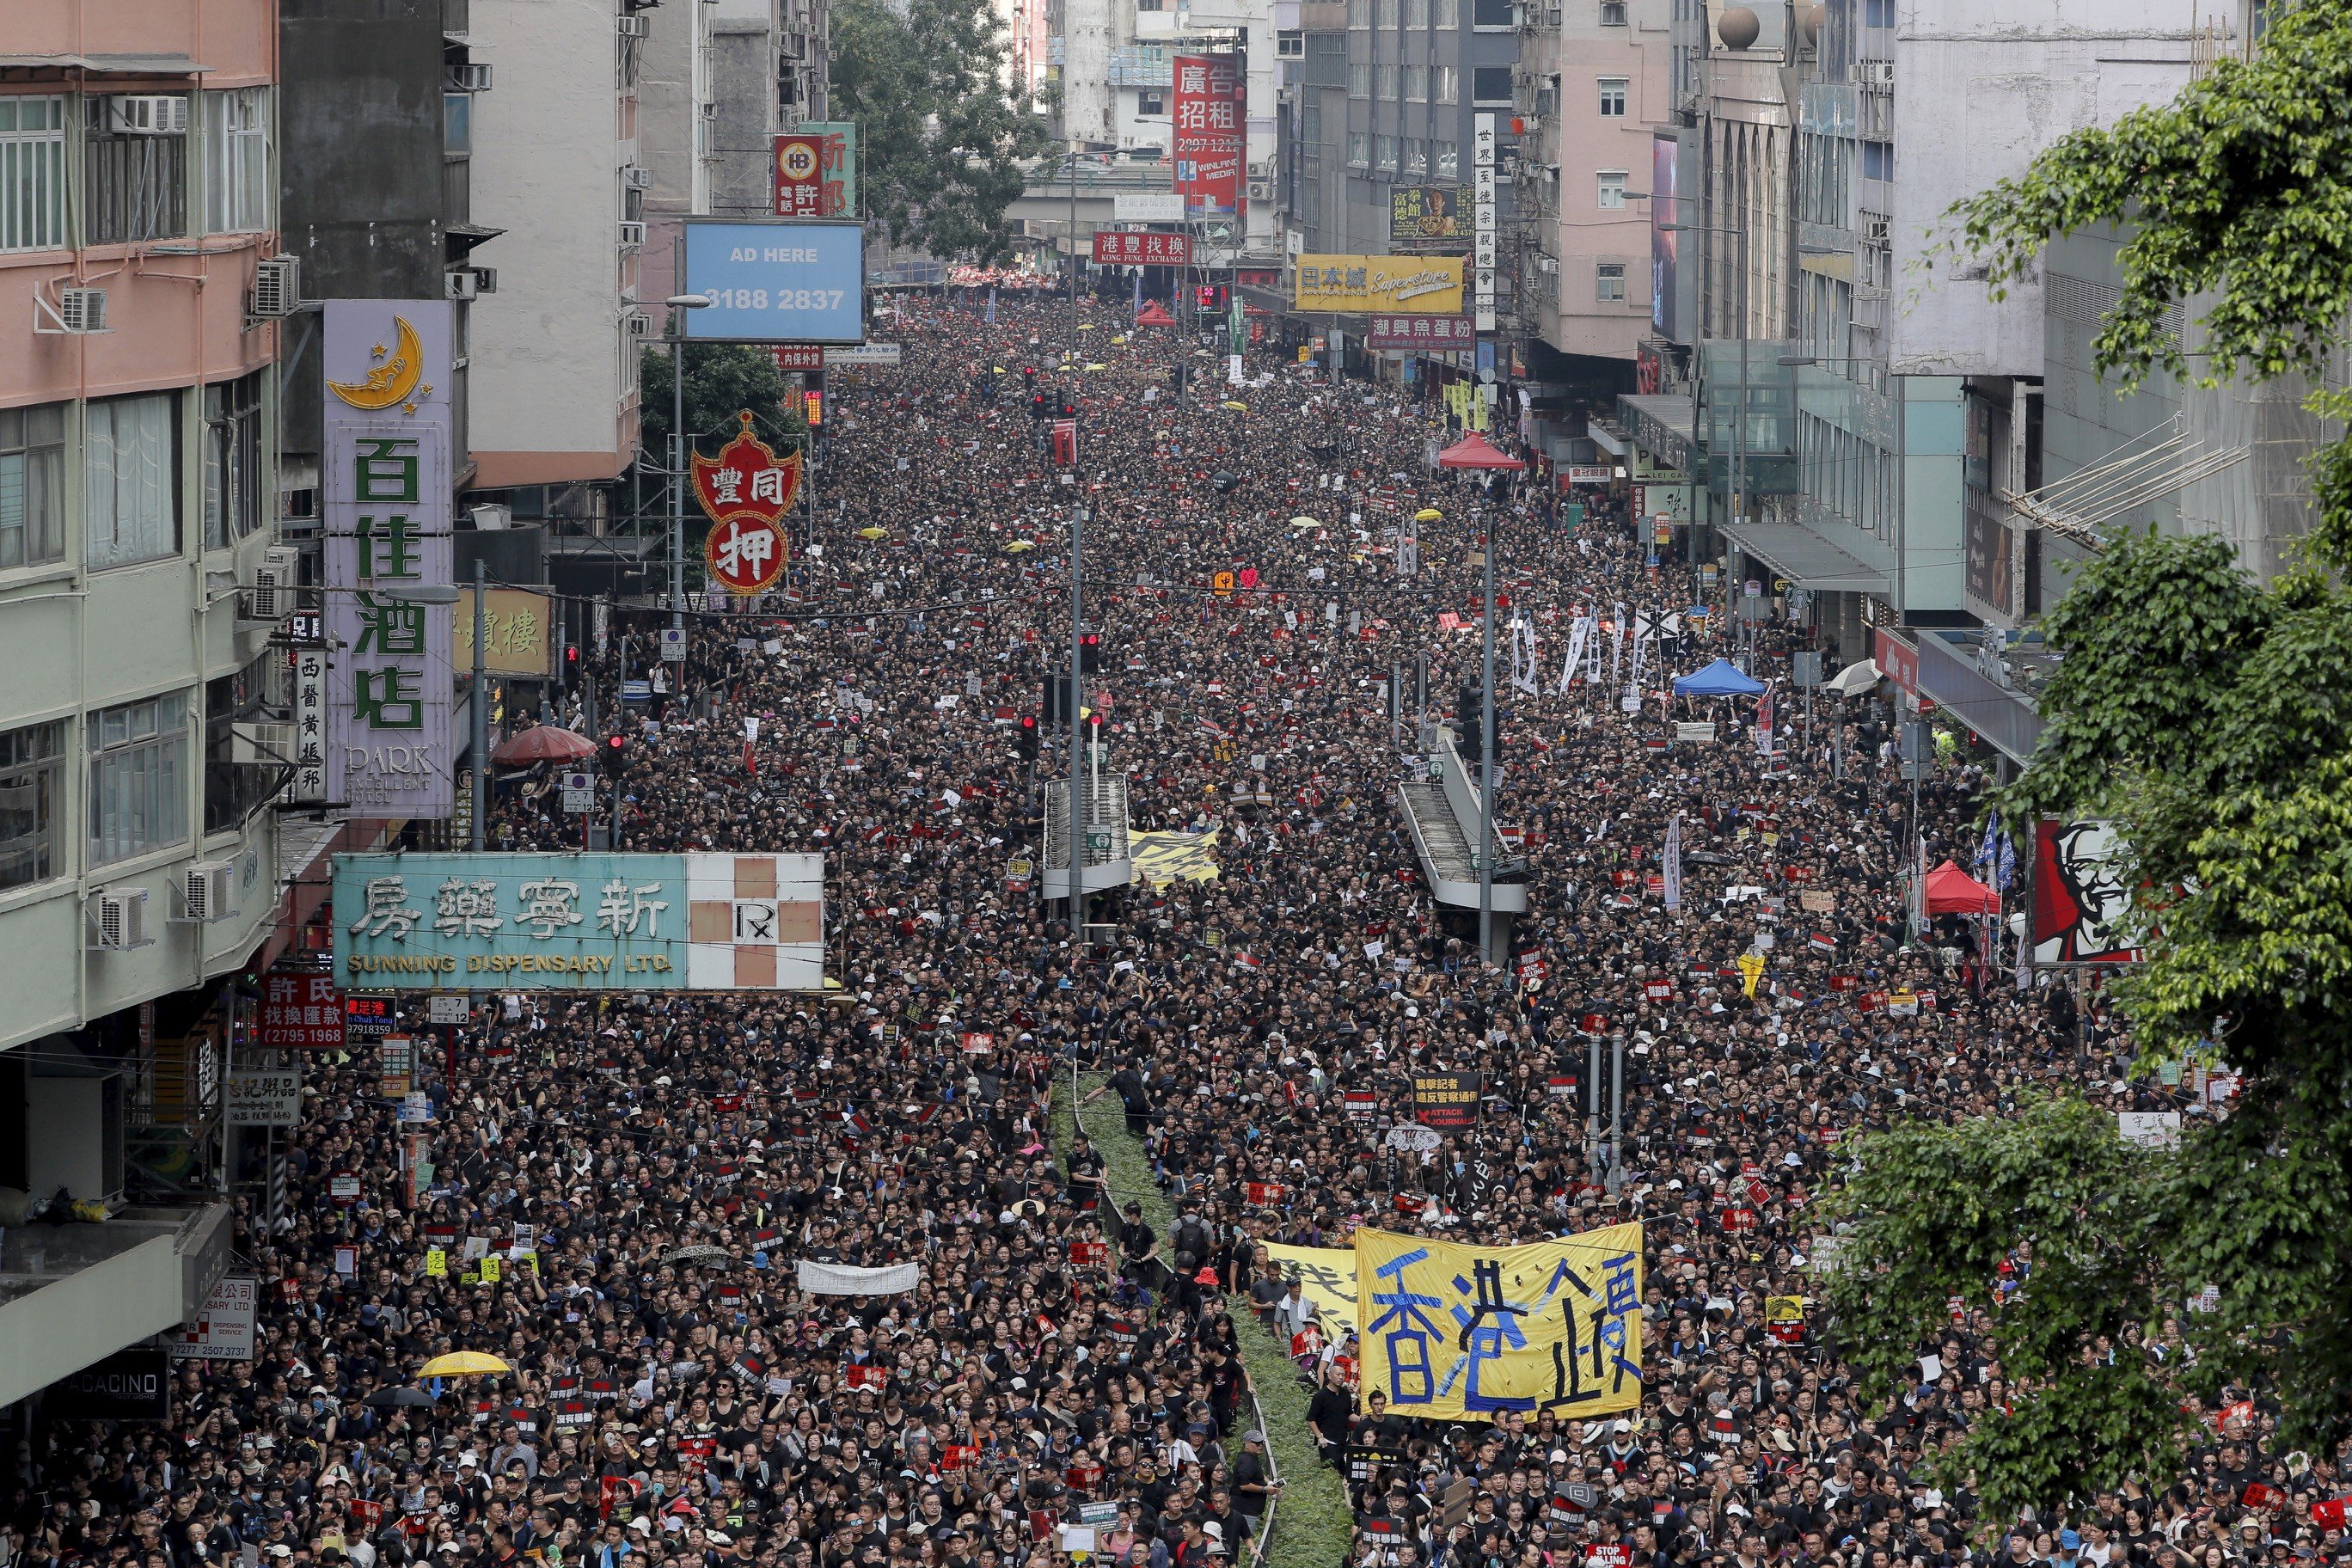 Tens of thousands of protesters march through the streets to demonstrate against the unpopular extradition bill in Hong Kong. Photo: AP